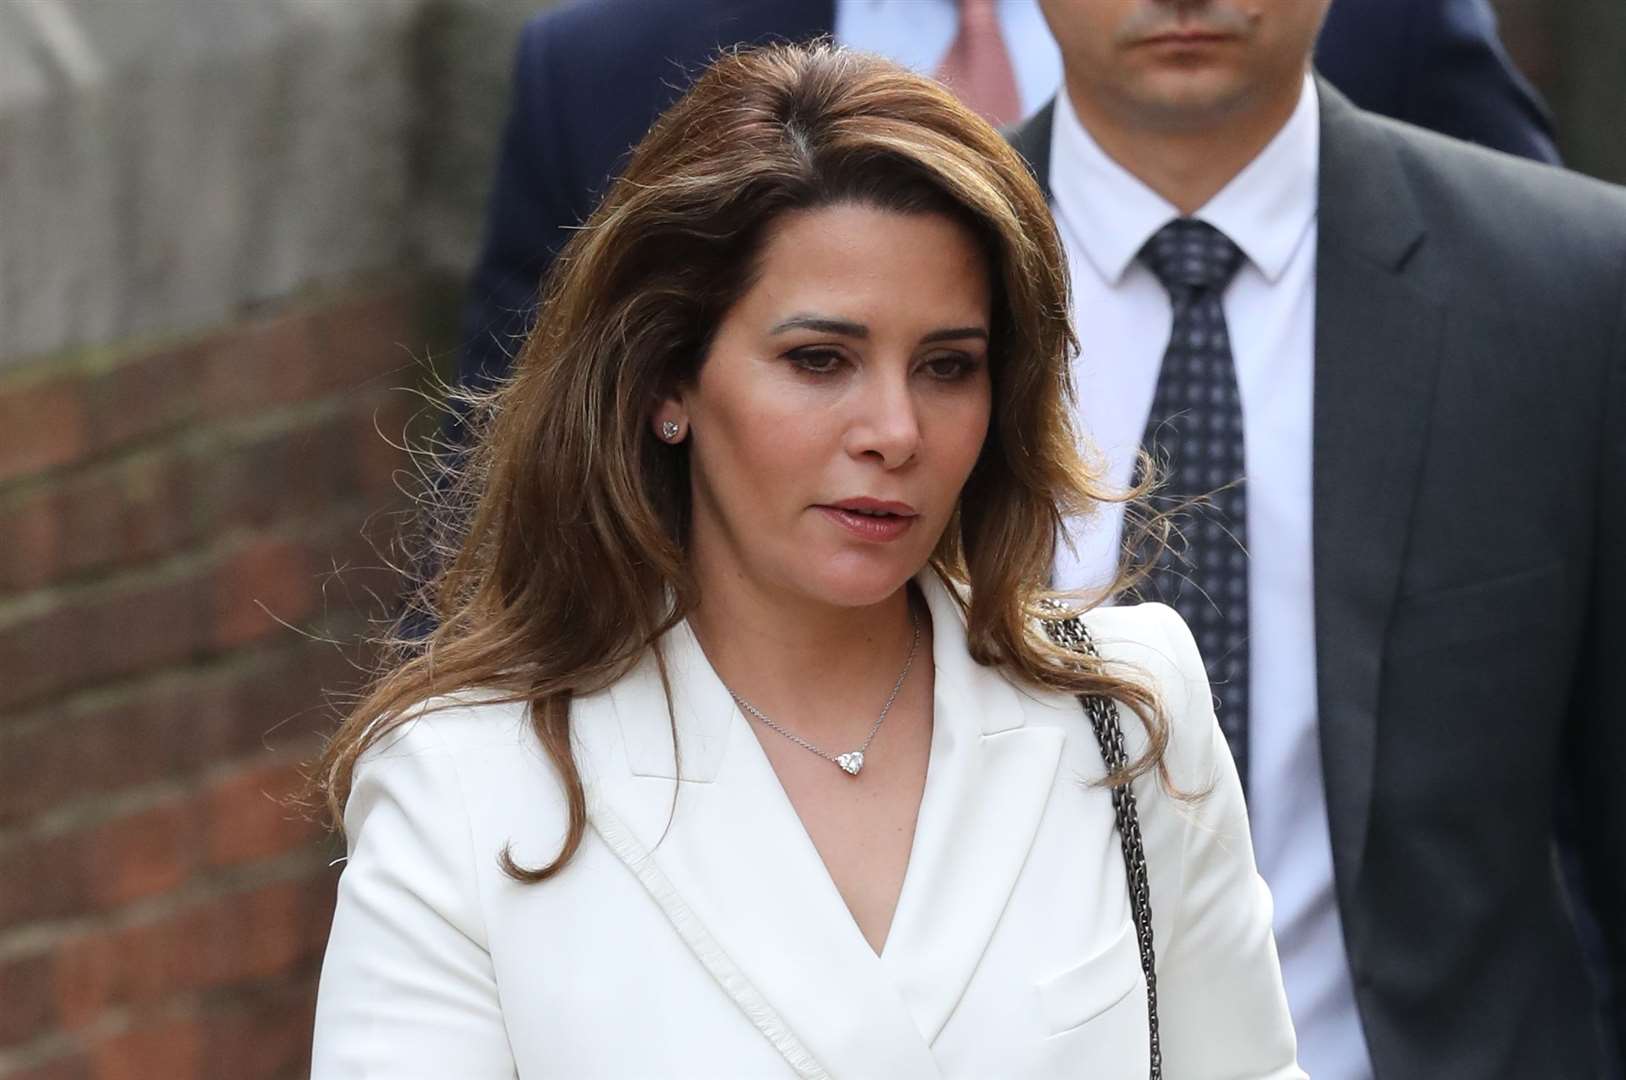 Princess Haya previously attended hearings at the Royal Courts of Justice in London (Aaron Chown/PA)